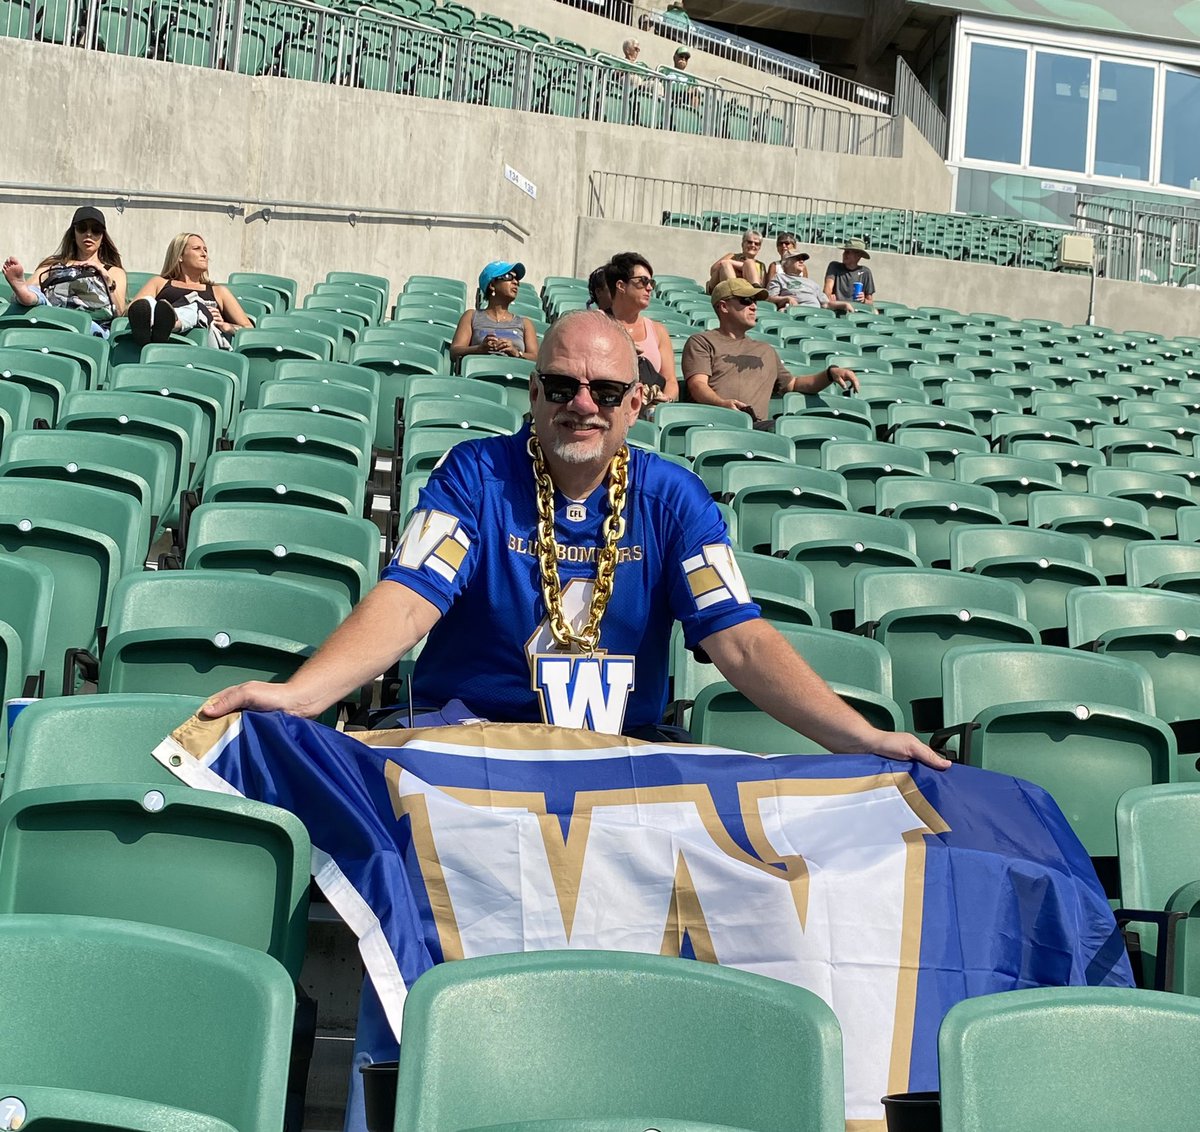 test Twitter Media - So much pre-game fun! Here’s hoping the game is as good! #ForTheW #GoBlue https://t.co/TGxnlb0dLH